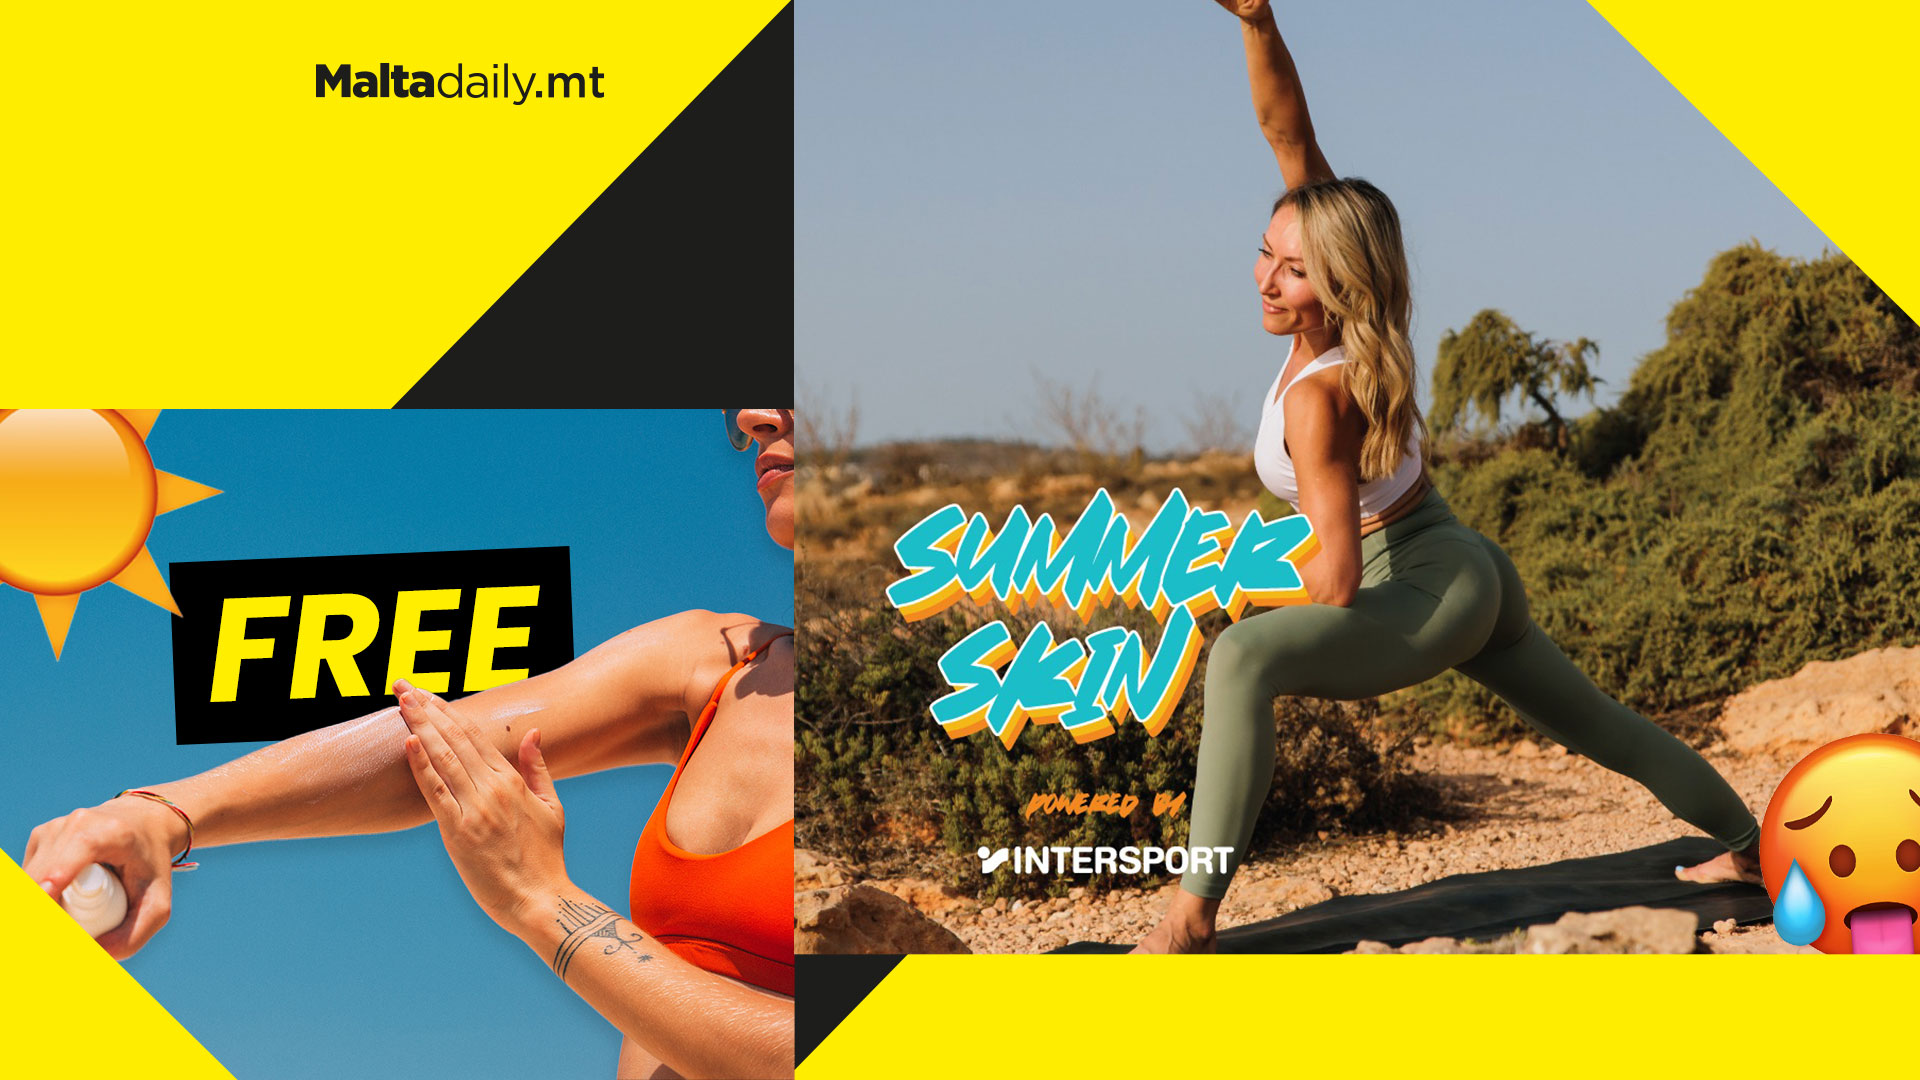 Get a FREE bottle of sunscreen with purchases over €75 at Intersport Malta